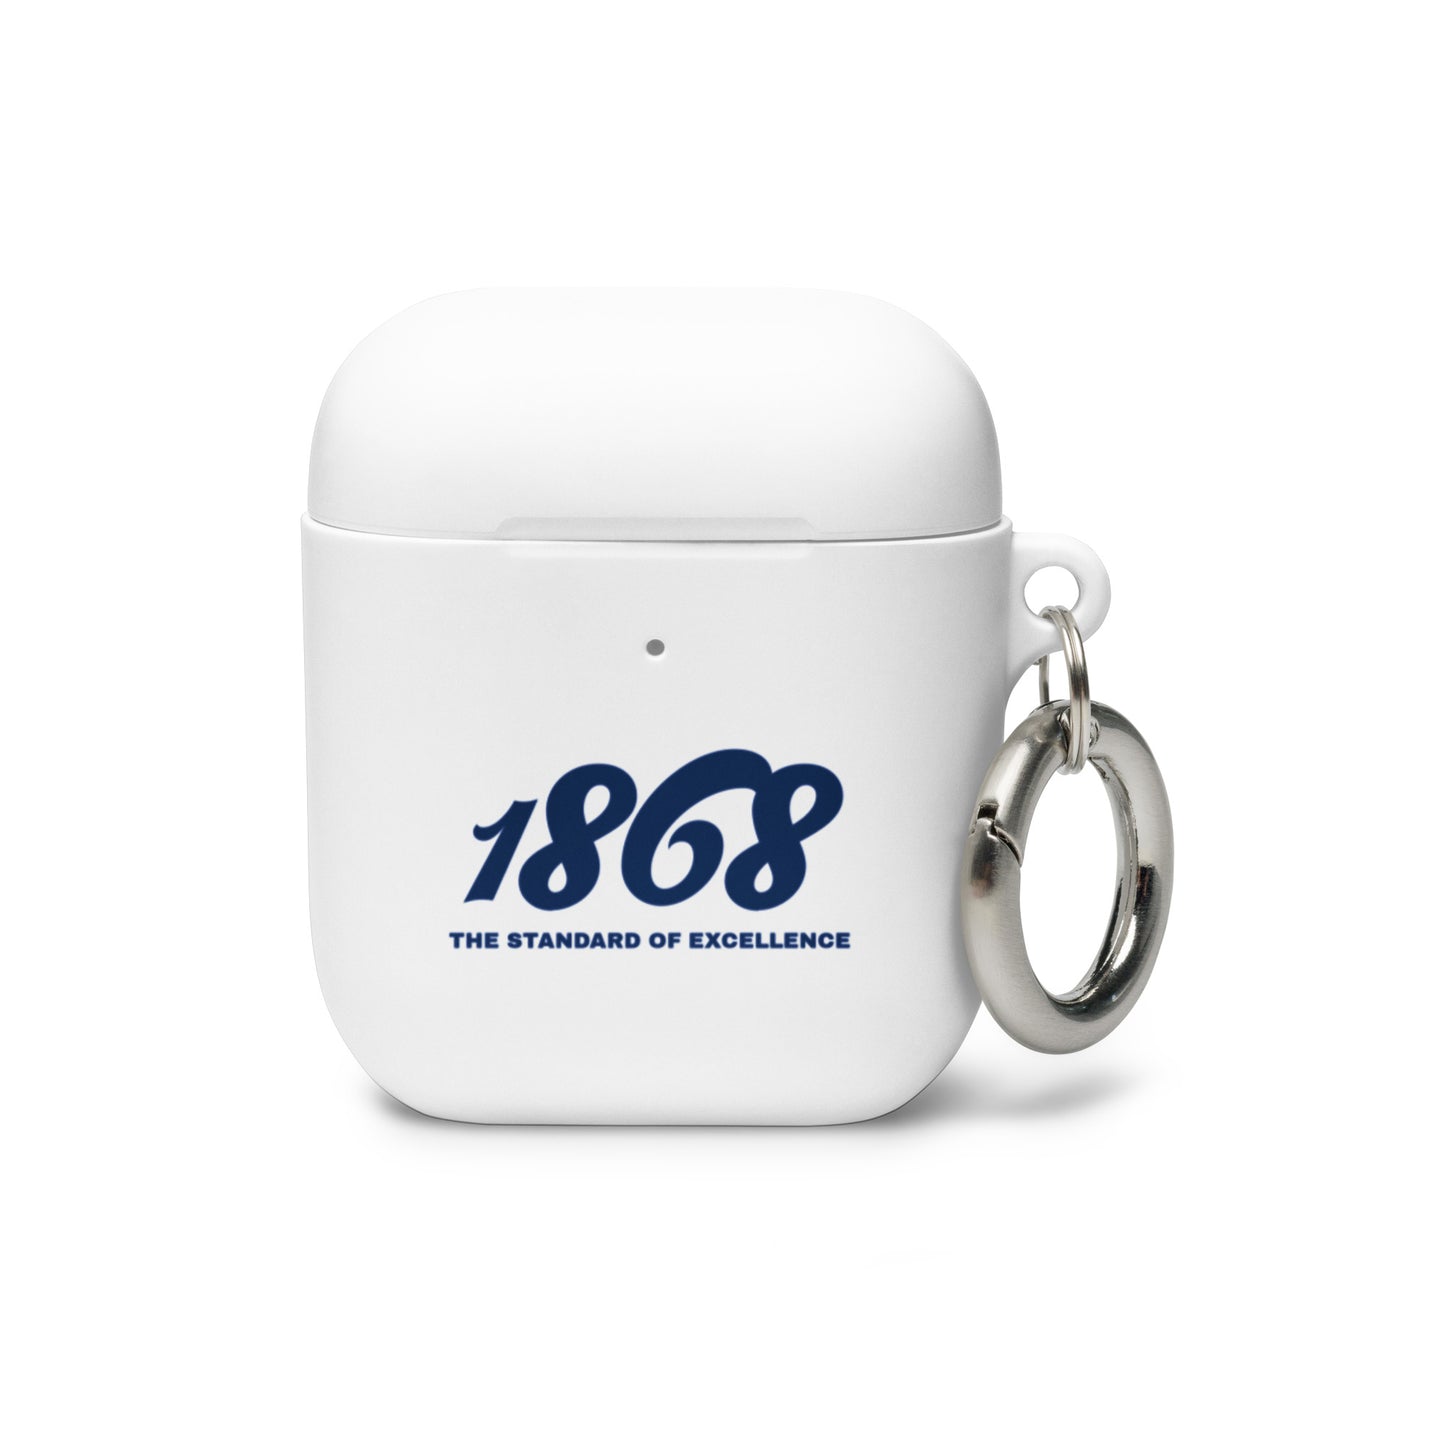 1868 Rubber AirPods® Case